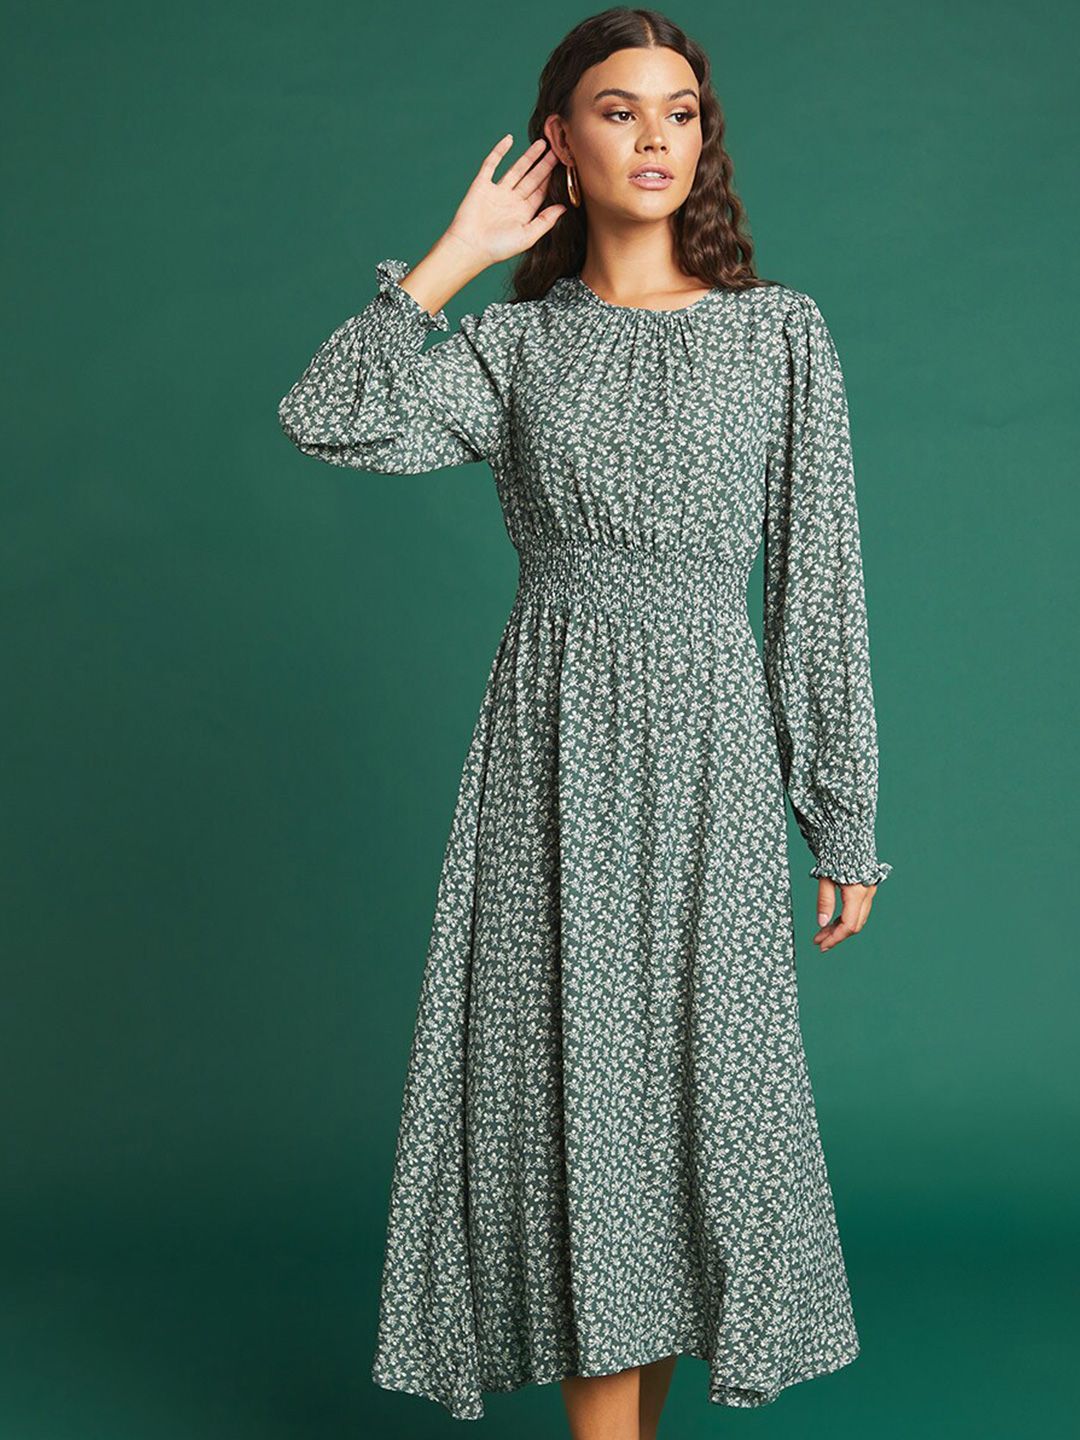 Styli Green Floral Drop-Waist Dress Price in India